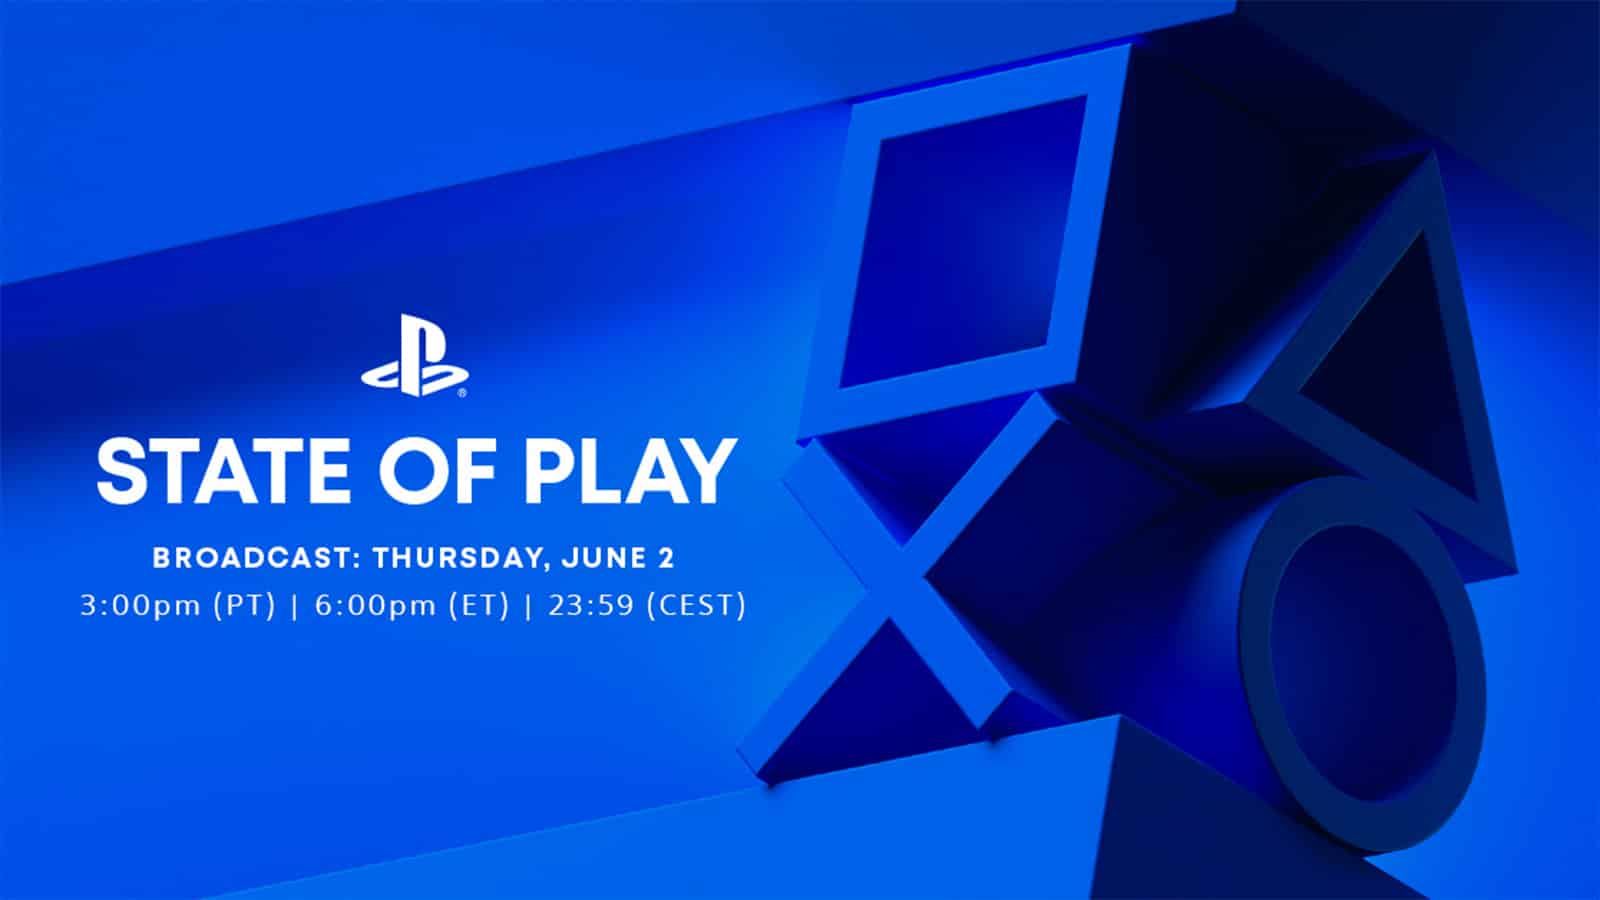 A poster for Sony State of Play on June 2